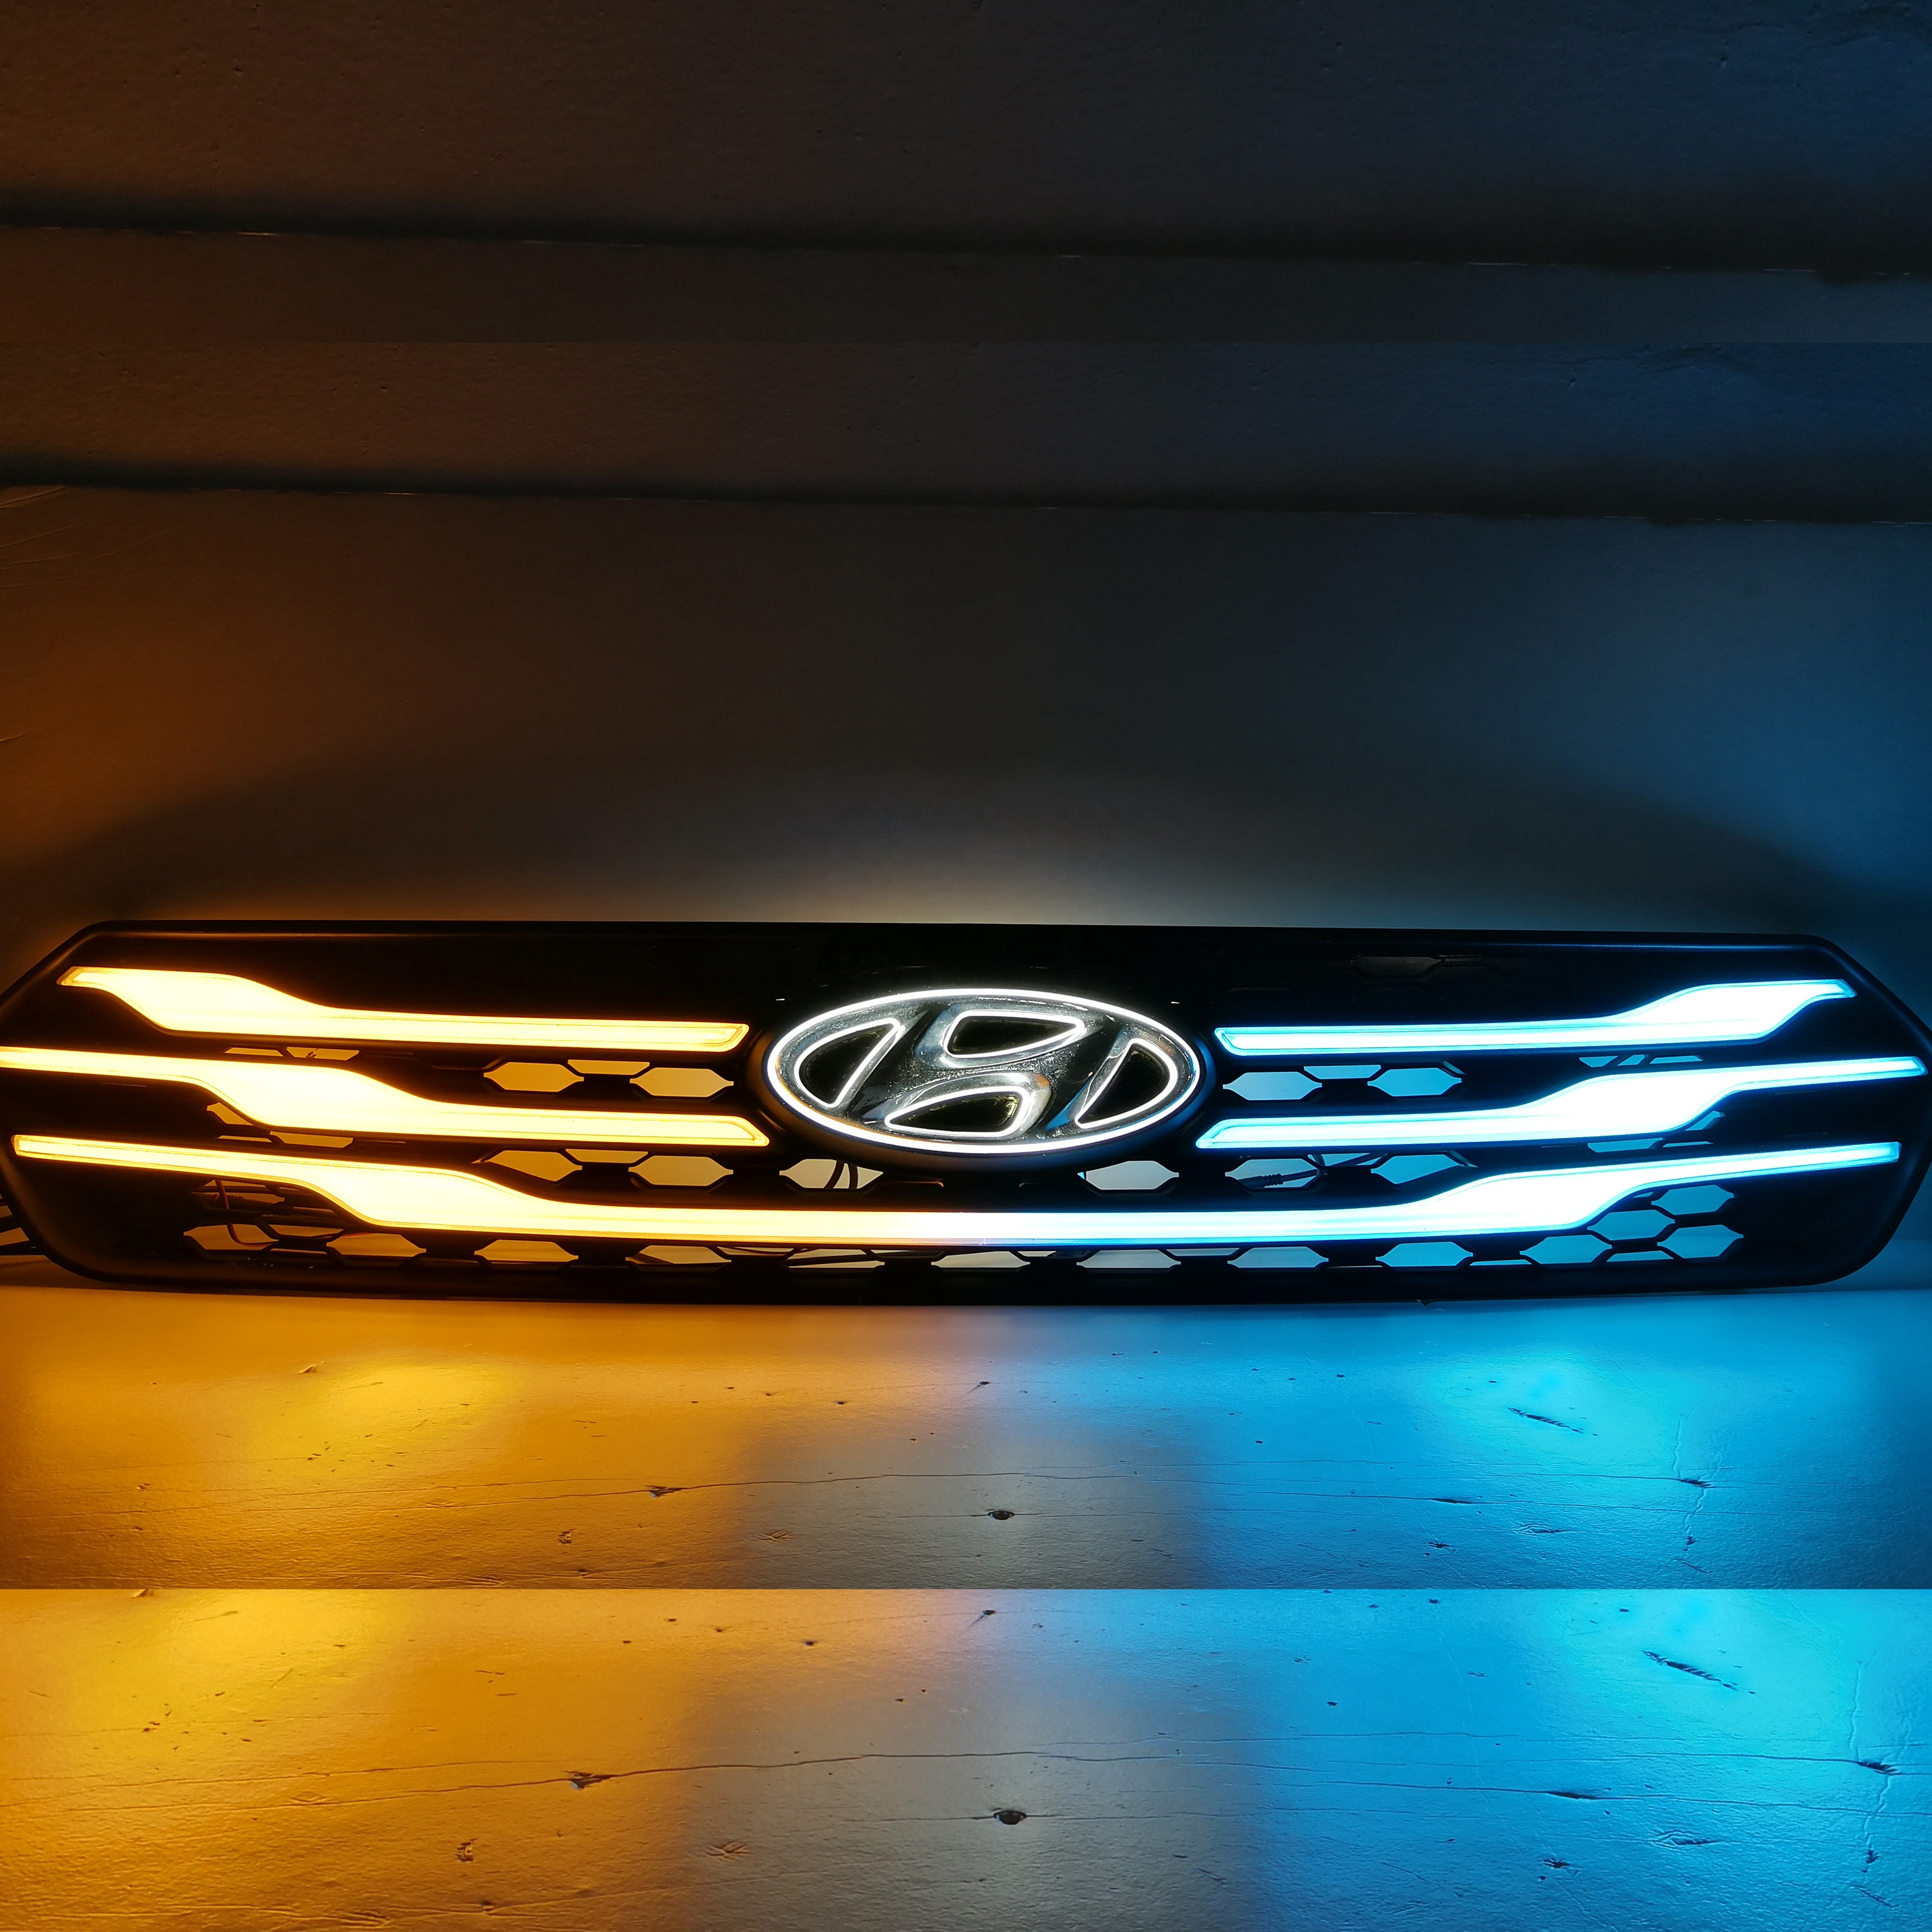 New arrived stylish Grille Lamp For CRETA 2018 / new version of grille lamp for creta 2018 CHEAP PRICE EVER